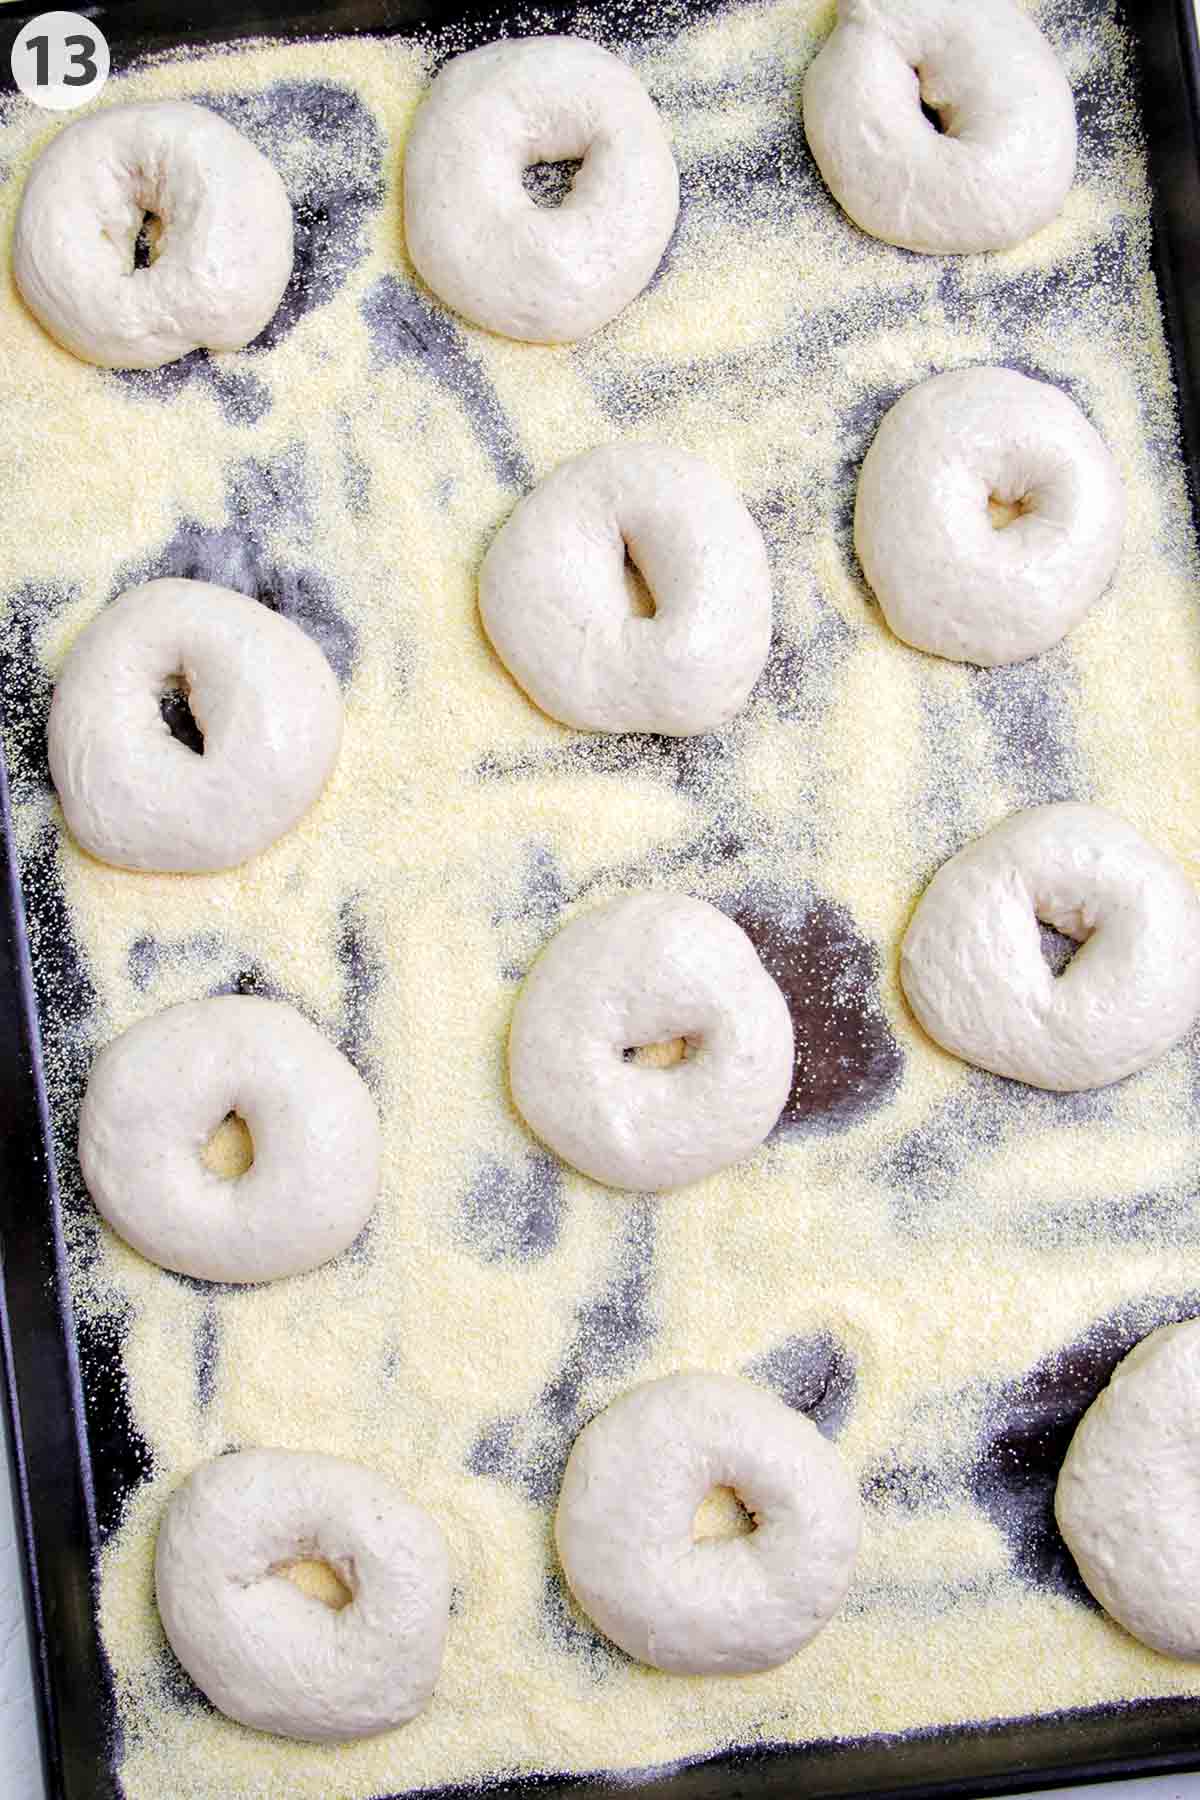 numbered photo showing proofed bagels on a sheet pan lined with corn meal.